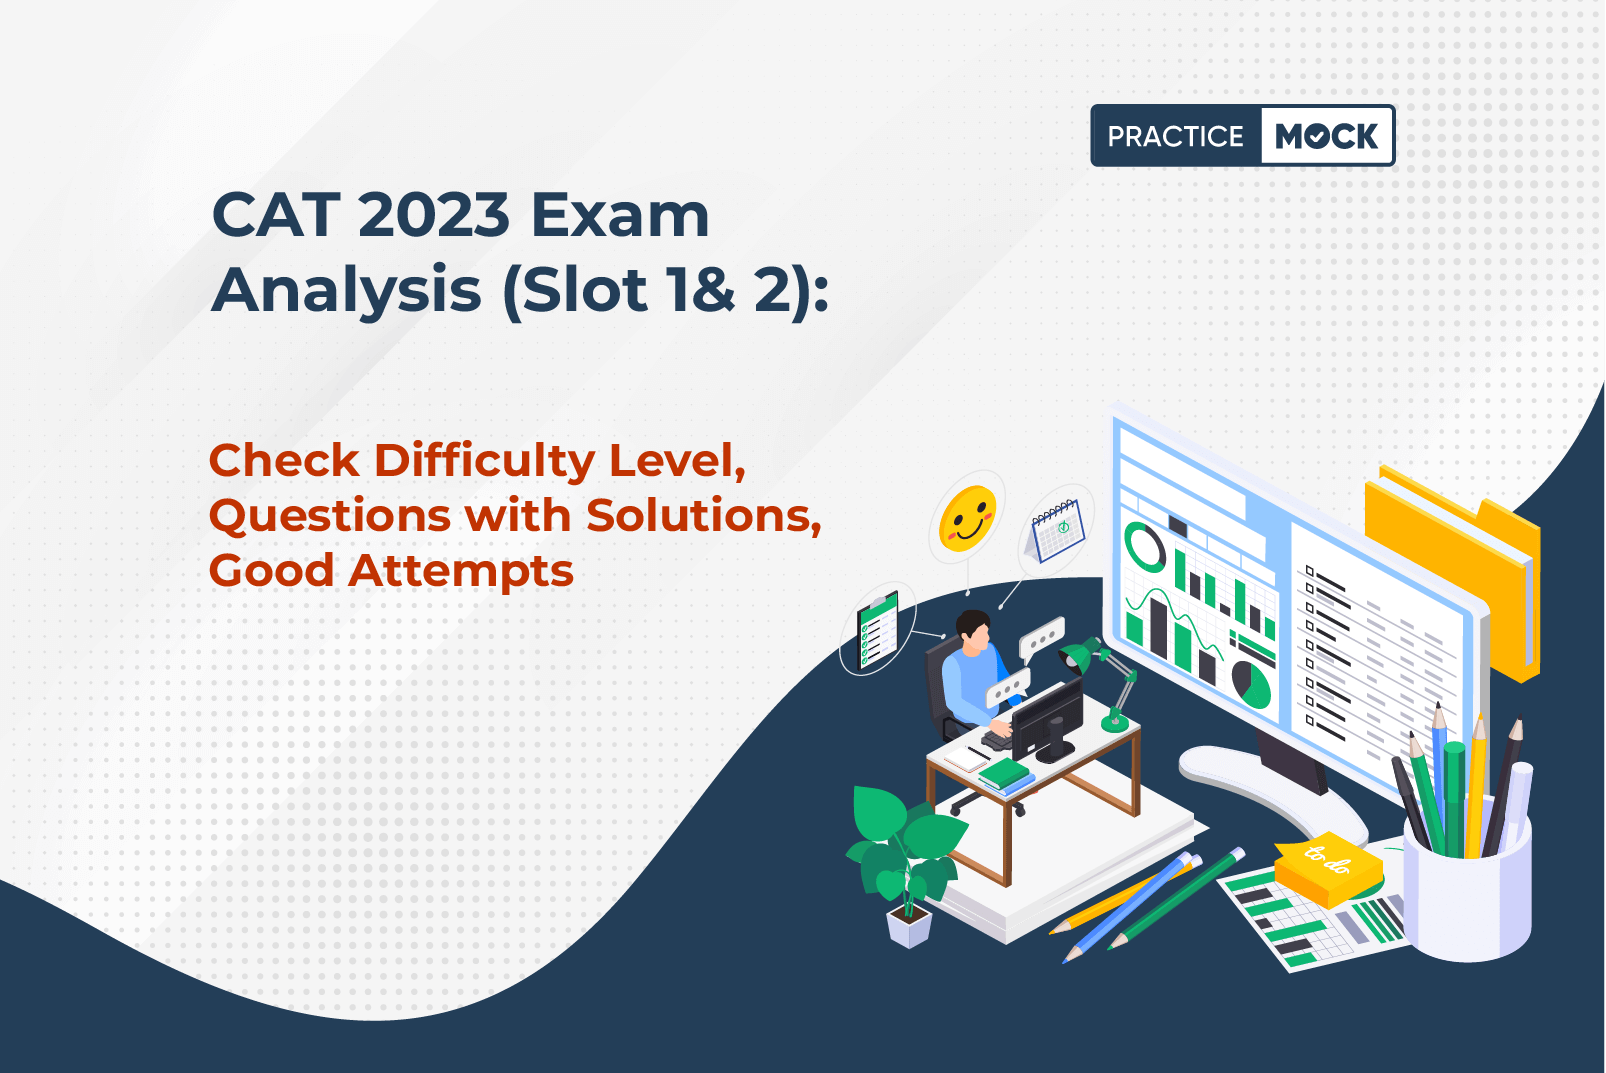 CAT 2023 Exam Analysis (Slot 1,2): Check Difficulty Level, Questions with Solutions, Good Attempts